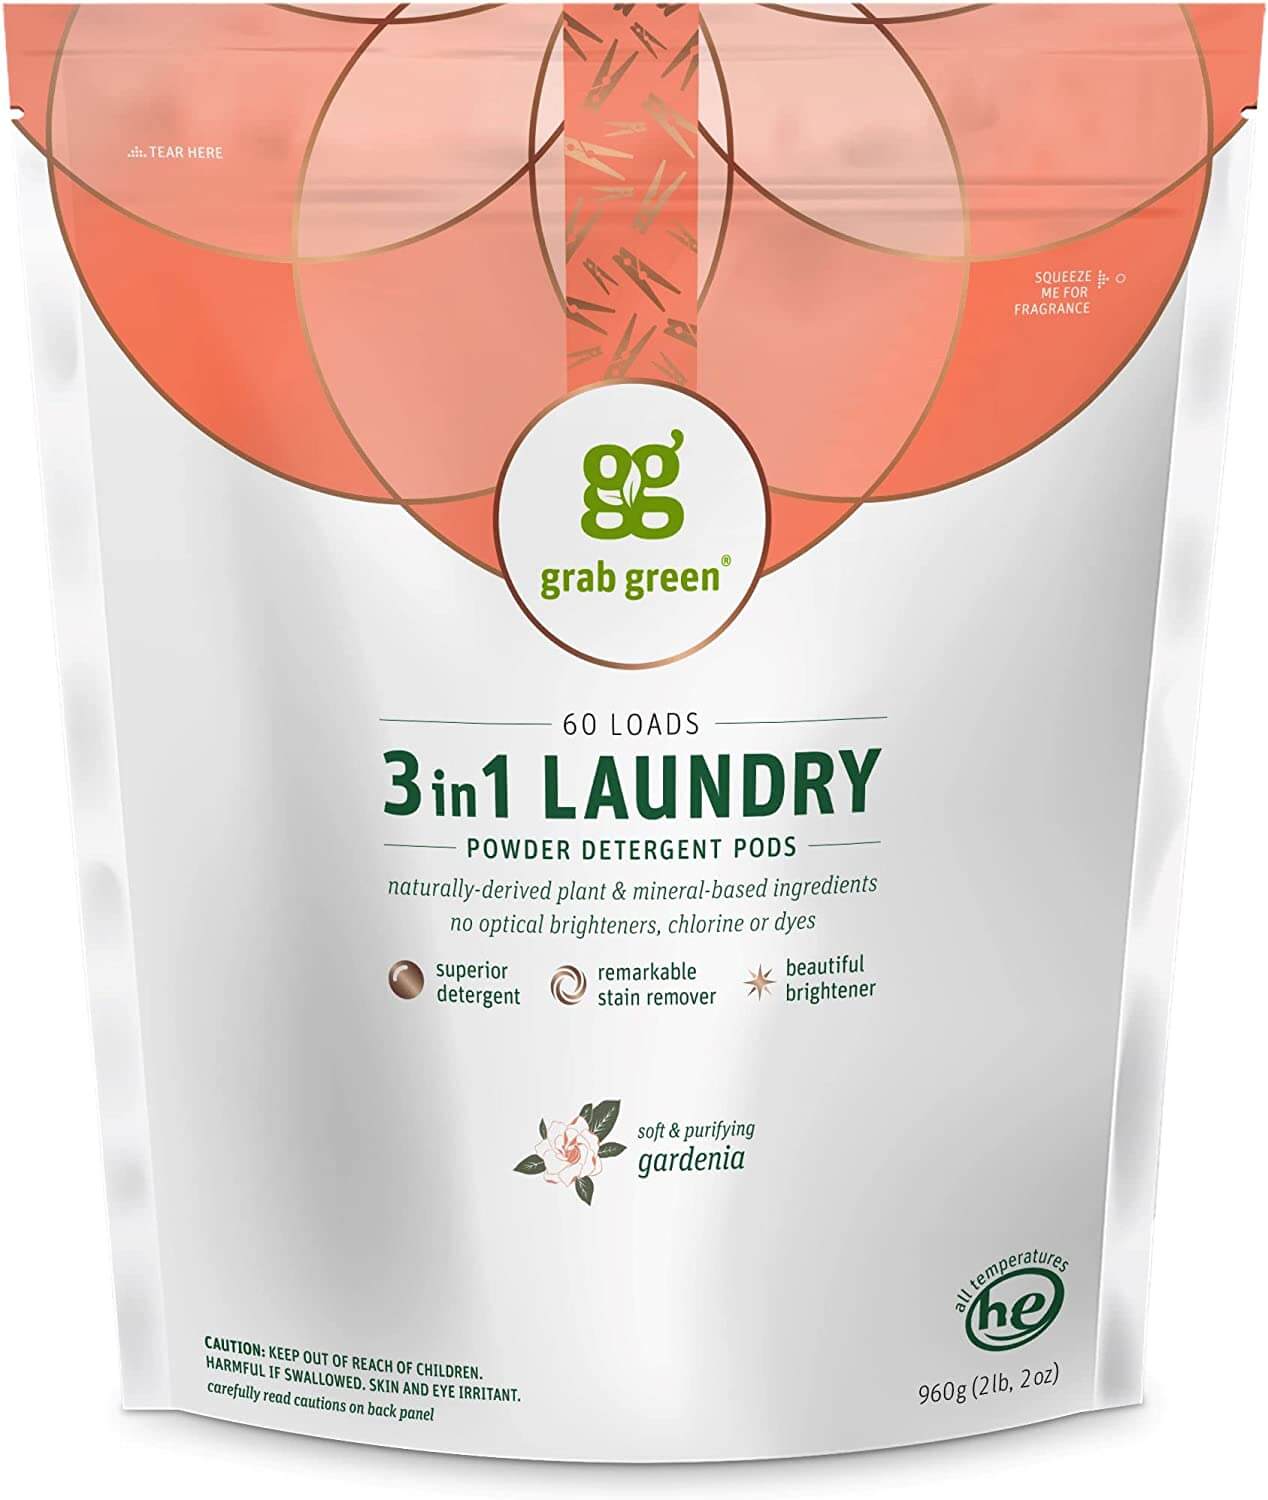 Grab Green 3-in-1 Laundry Detergent Pods